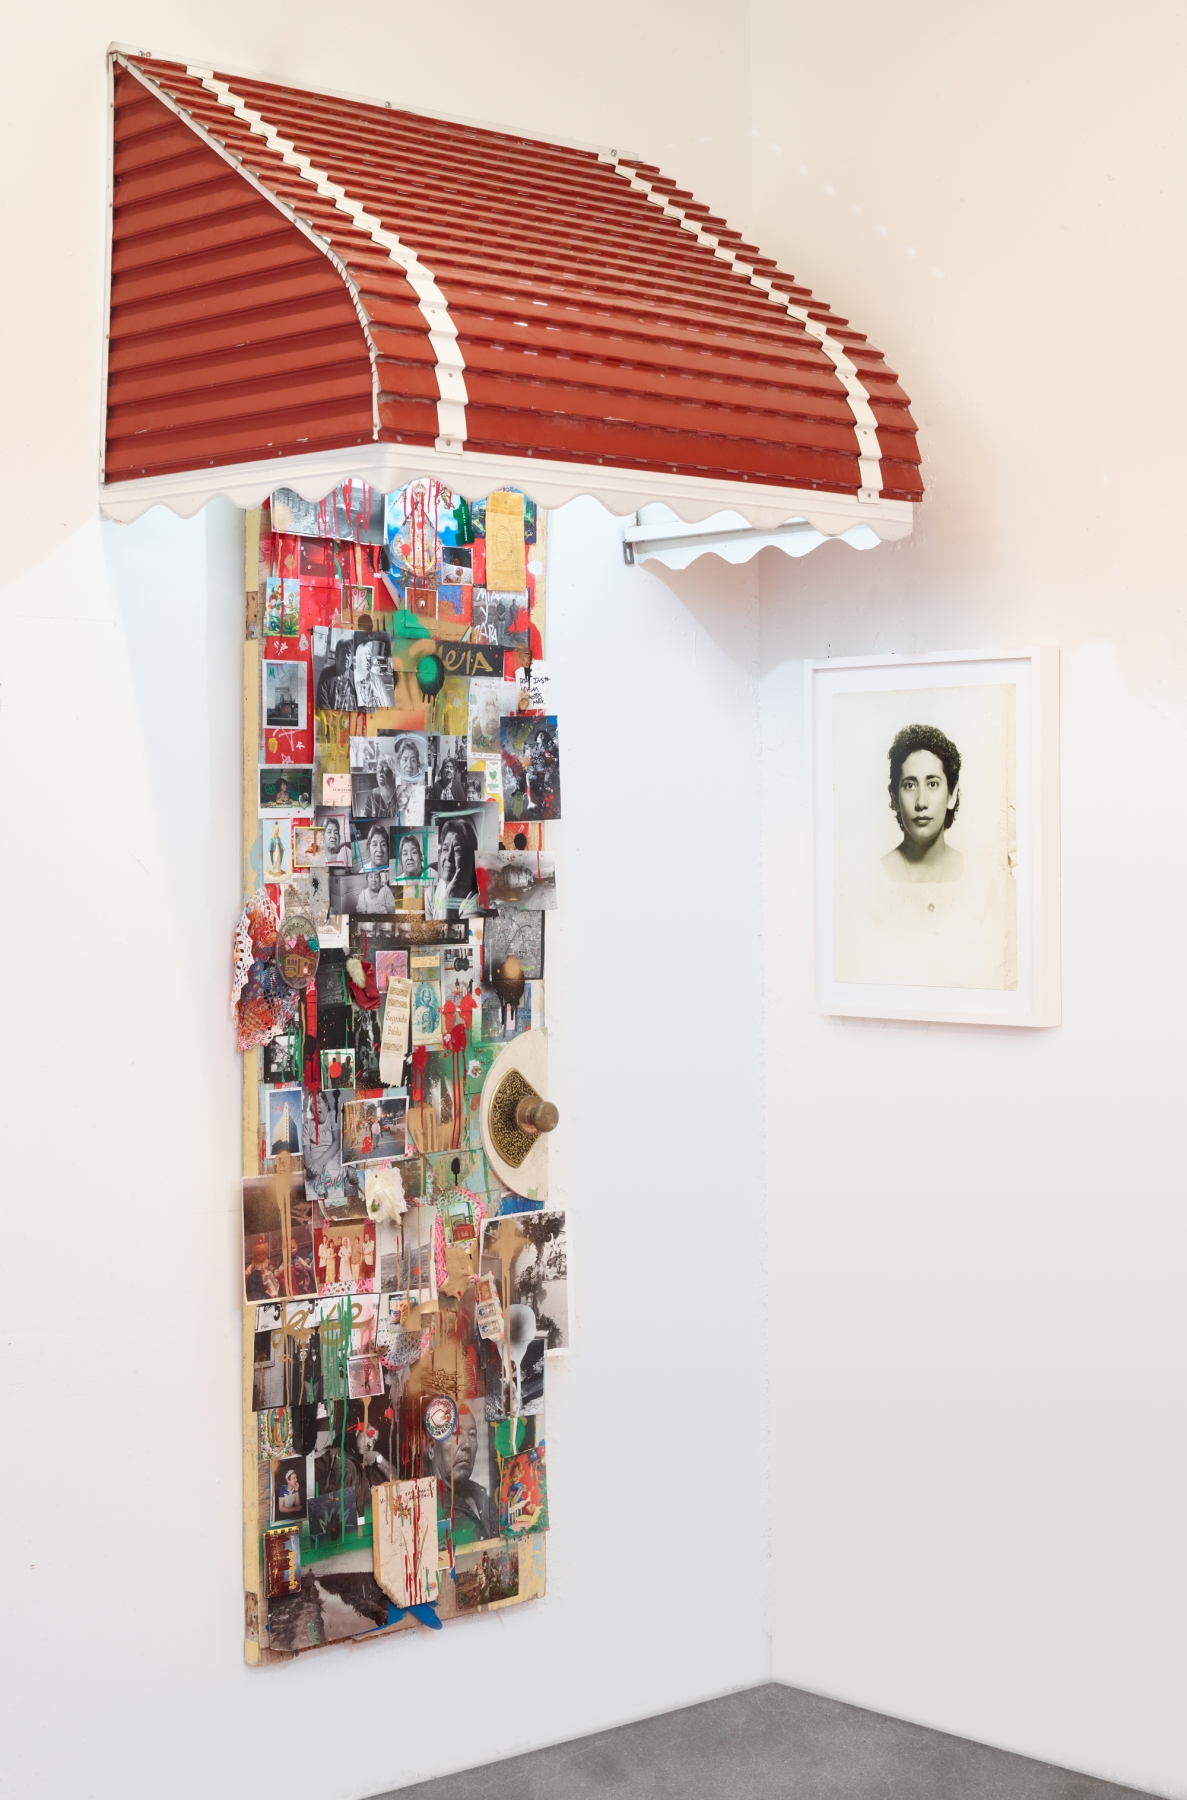 Daniel Ramos
Faith And Fate Go Hand In Hand, 2020
Awning, wooden door from Mexico, silver gelatin prints, postcards, doilies, acrylic paint, cardboard, nails, enamel, Polaroids, inkjet prints, ephemera, wax, stamps, envelopes
99 x 45 x 25 1/2 inches